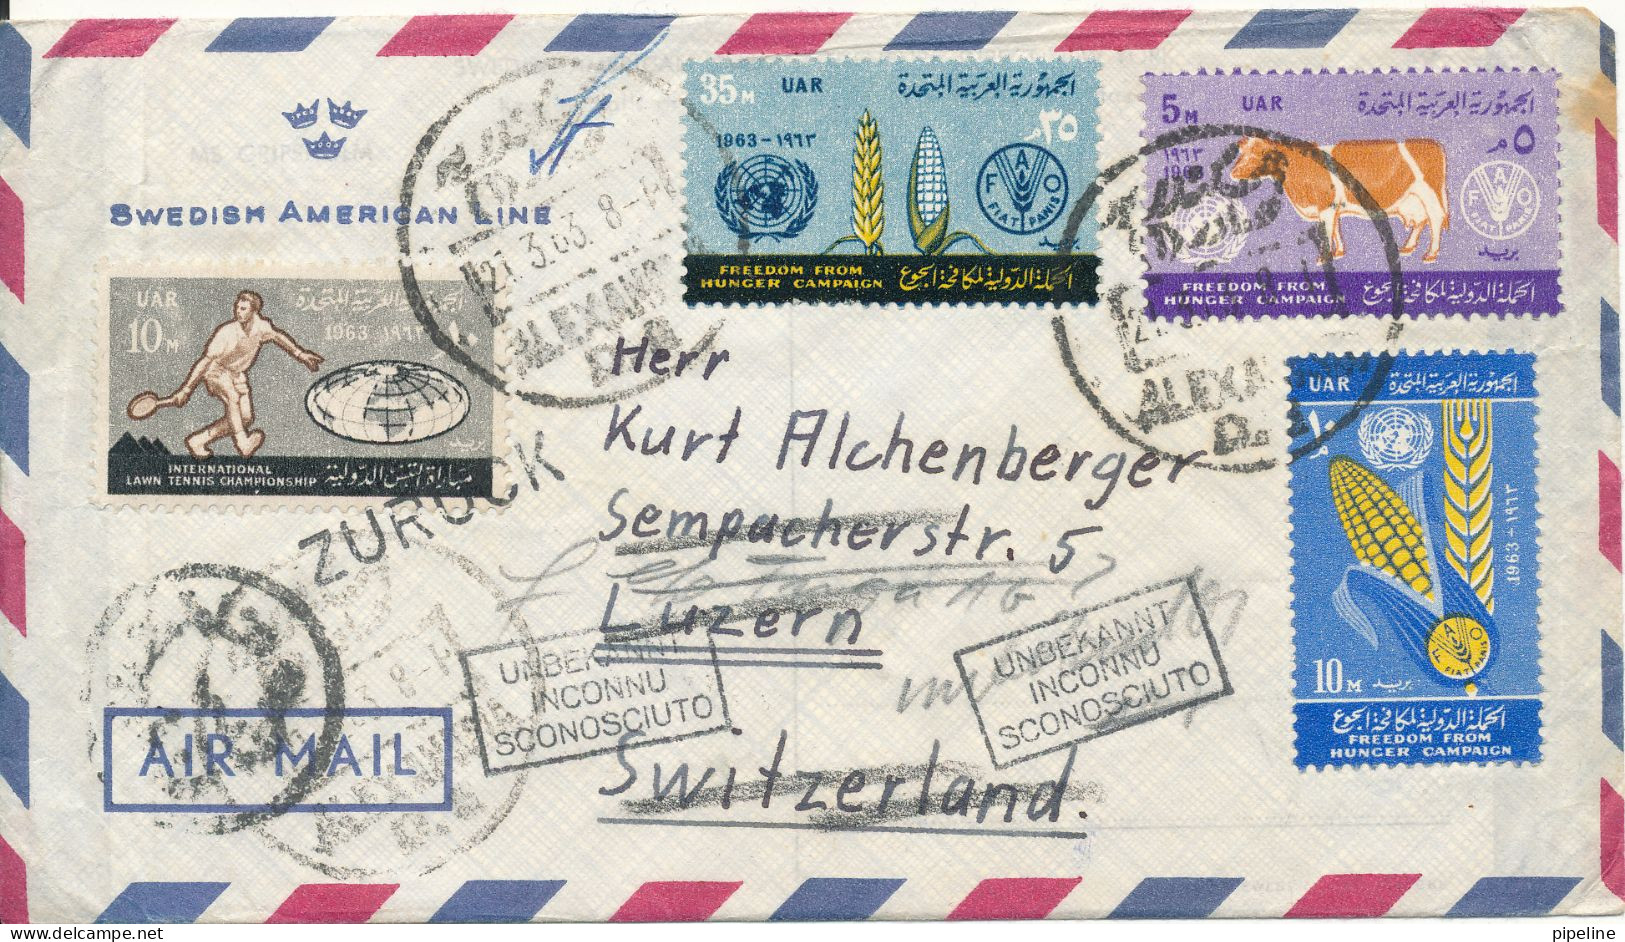 UAR Egypt Air Mail Cover Sent To Switzerland 21-3-1963 And Returned Because Of Unknown Address (Swedish American Line) - Luftpost